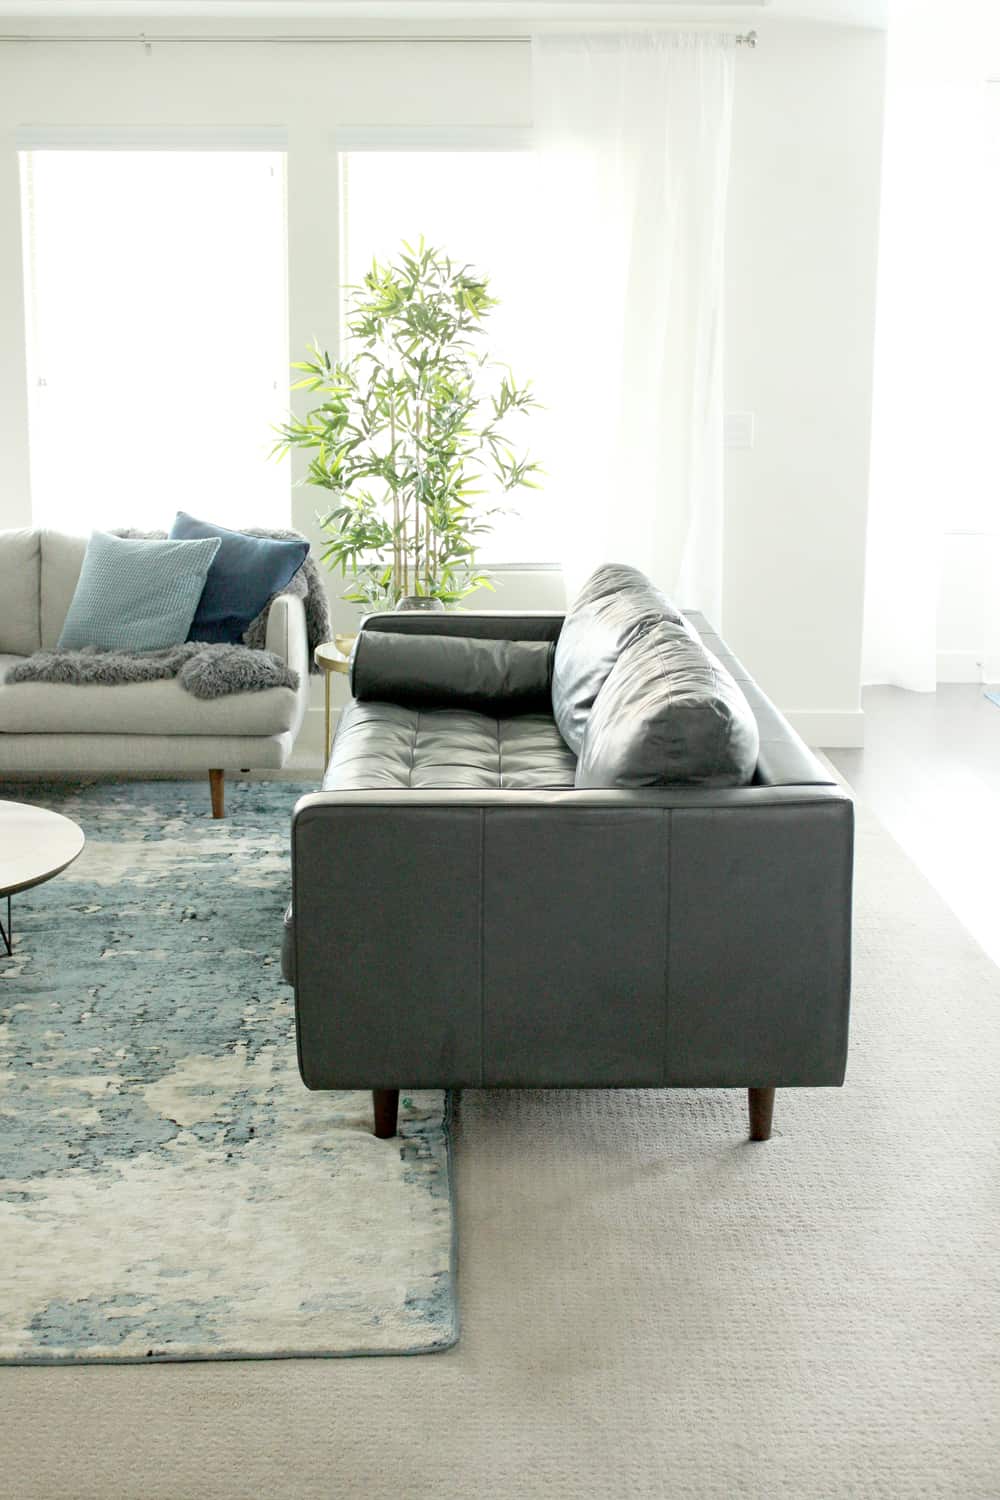 I'm totally in love with this cozy, modern living room space! It makes the most out of the size, and pairs looks and functionality so well! Great prices, too! 